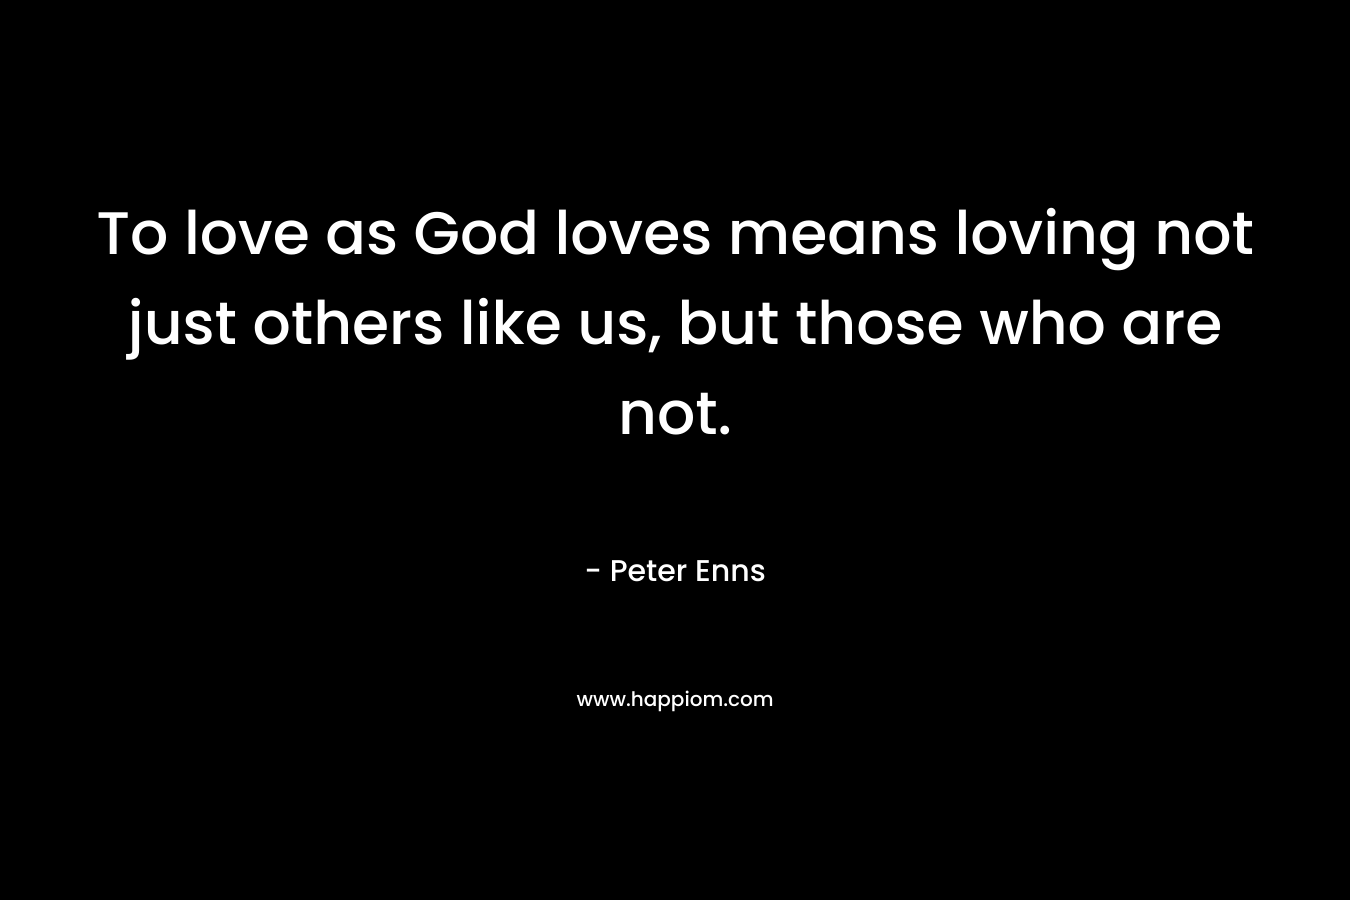 To love as God loves means loving not just others like us, but those who are not.